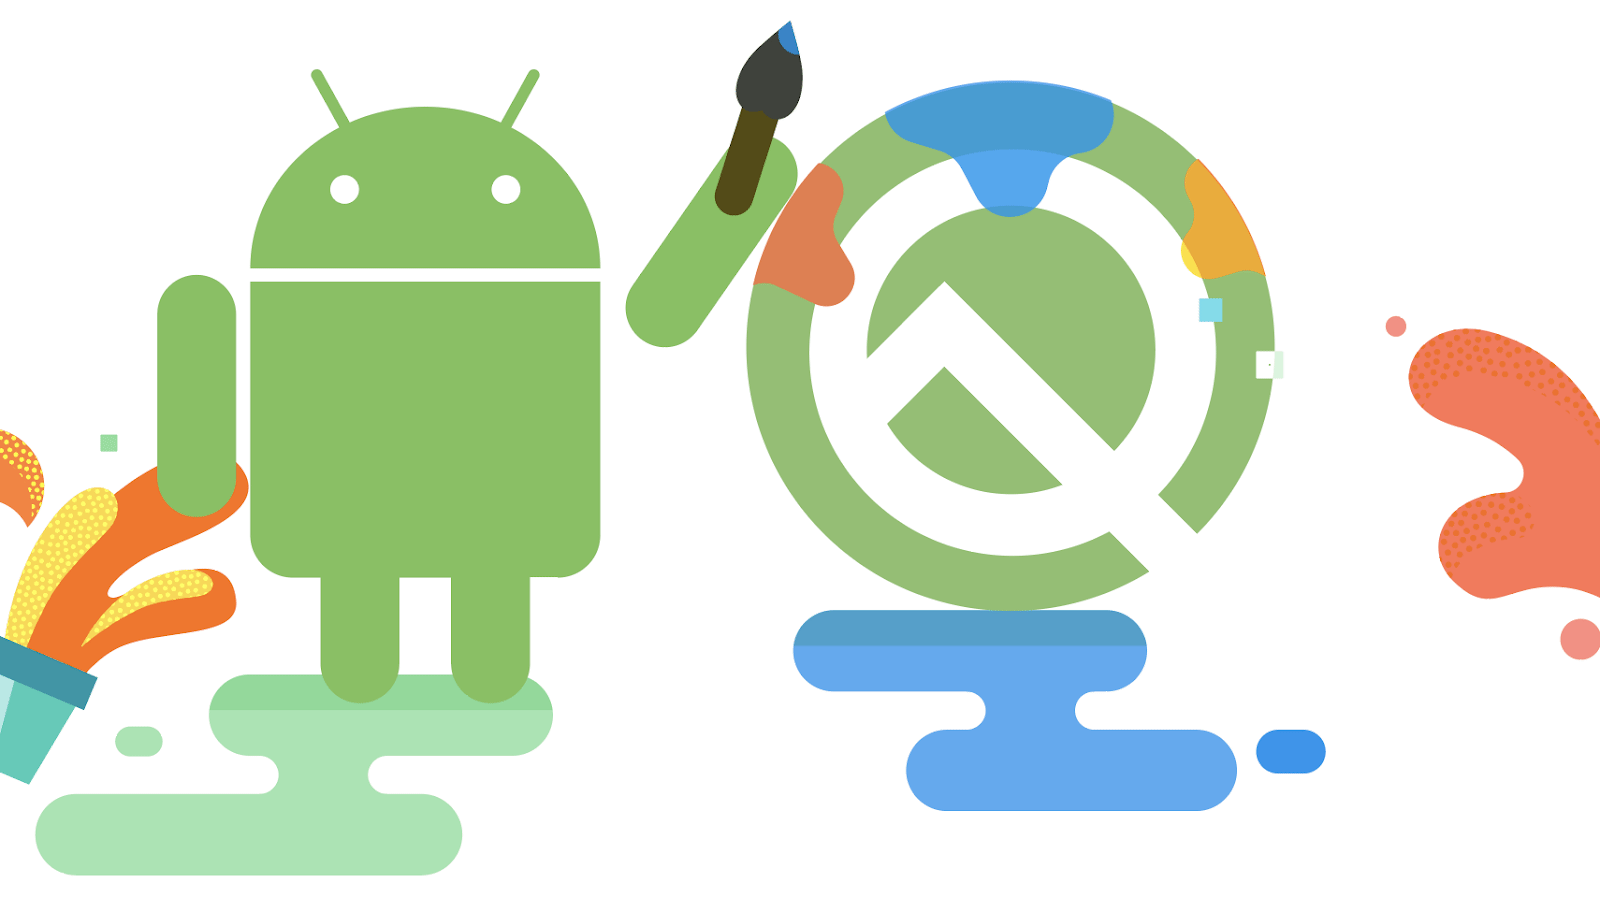 Images of Android bot painting a canvas